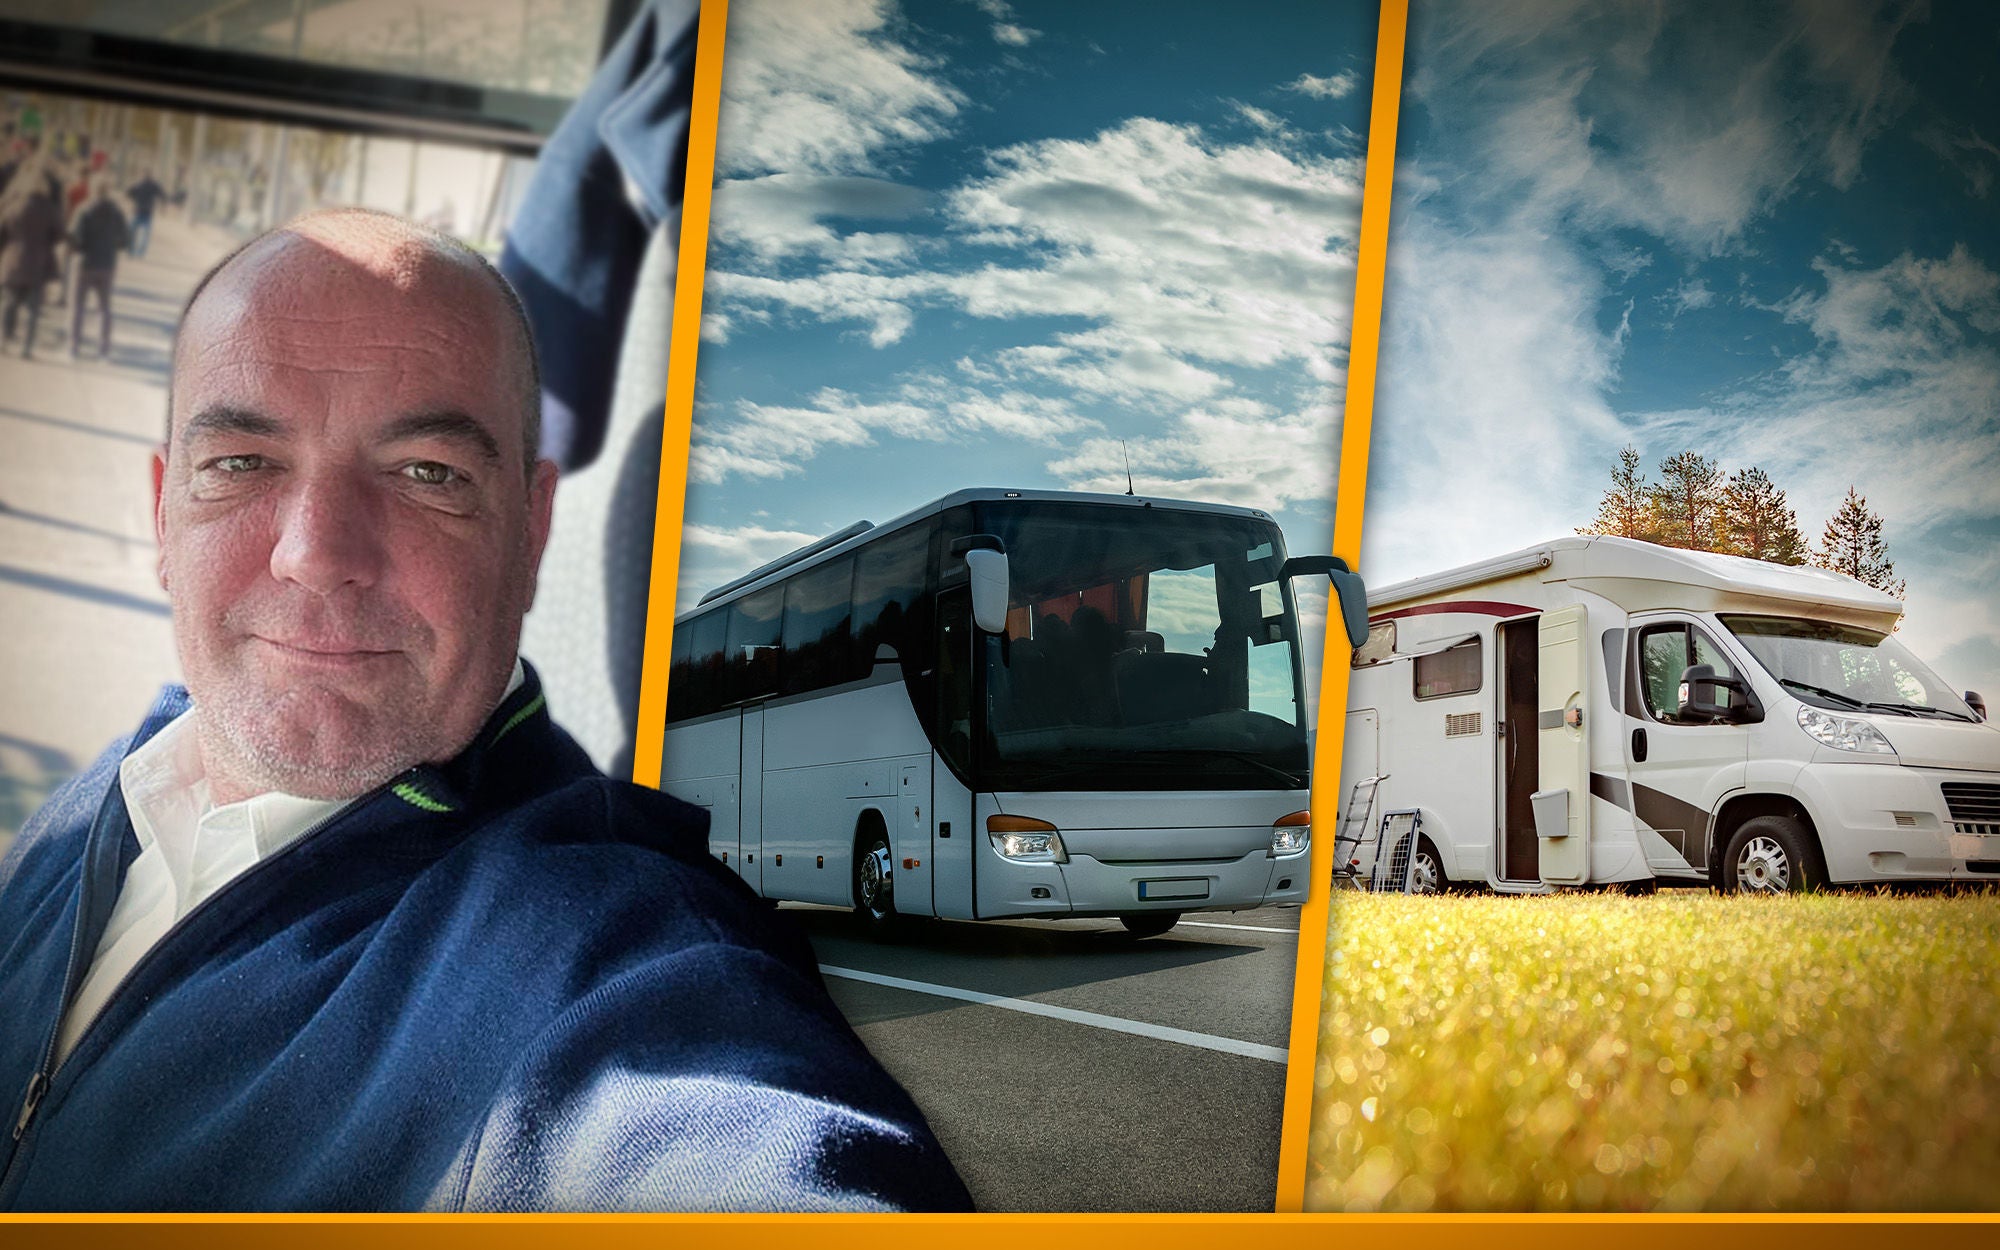 Bus driver Mirko on the left side. Next to him a bus on the road and a camper on nice spot with a blue sky